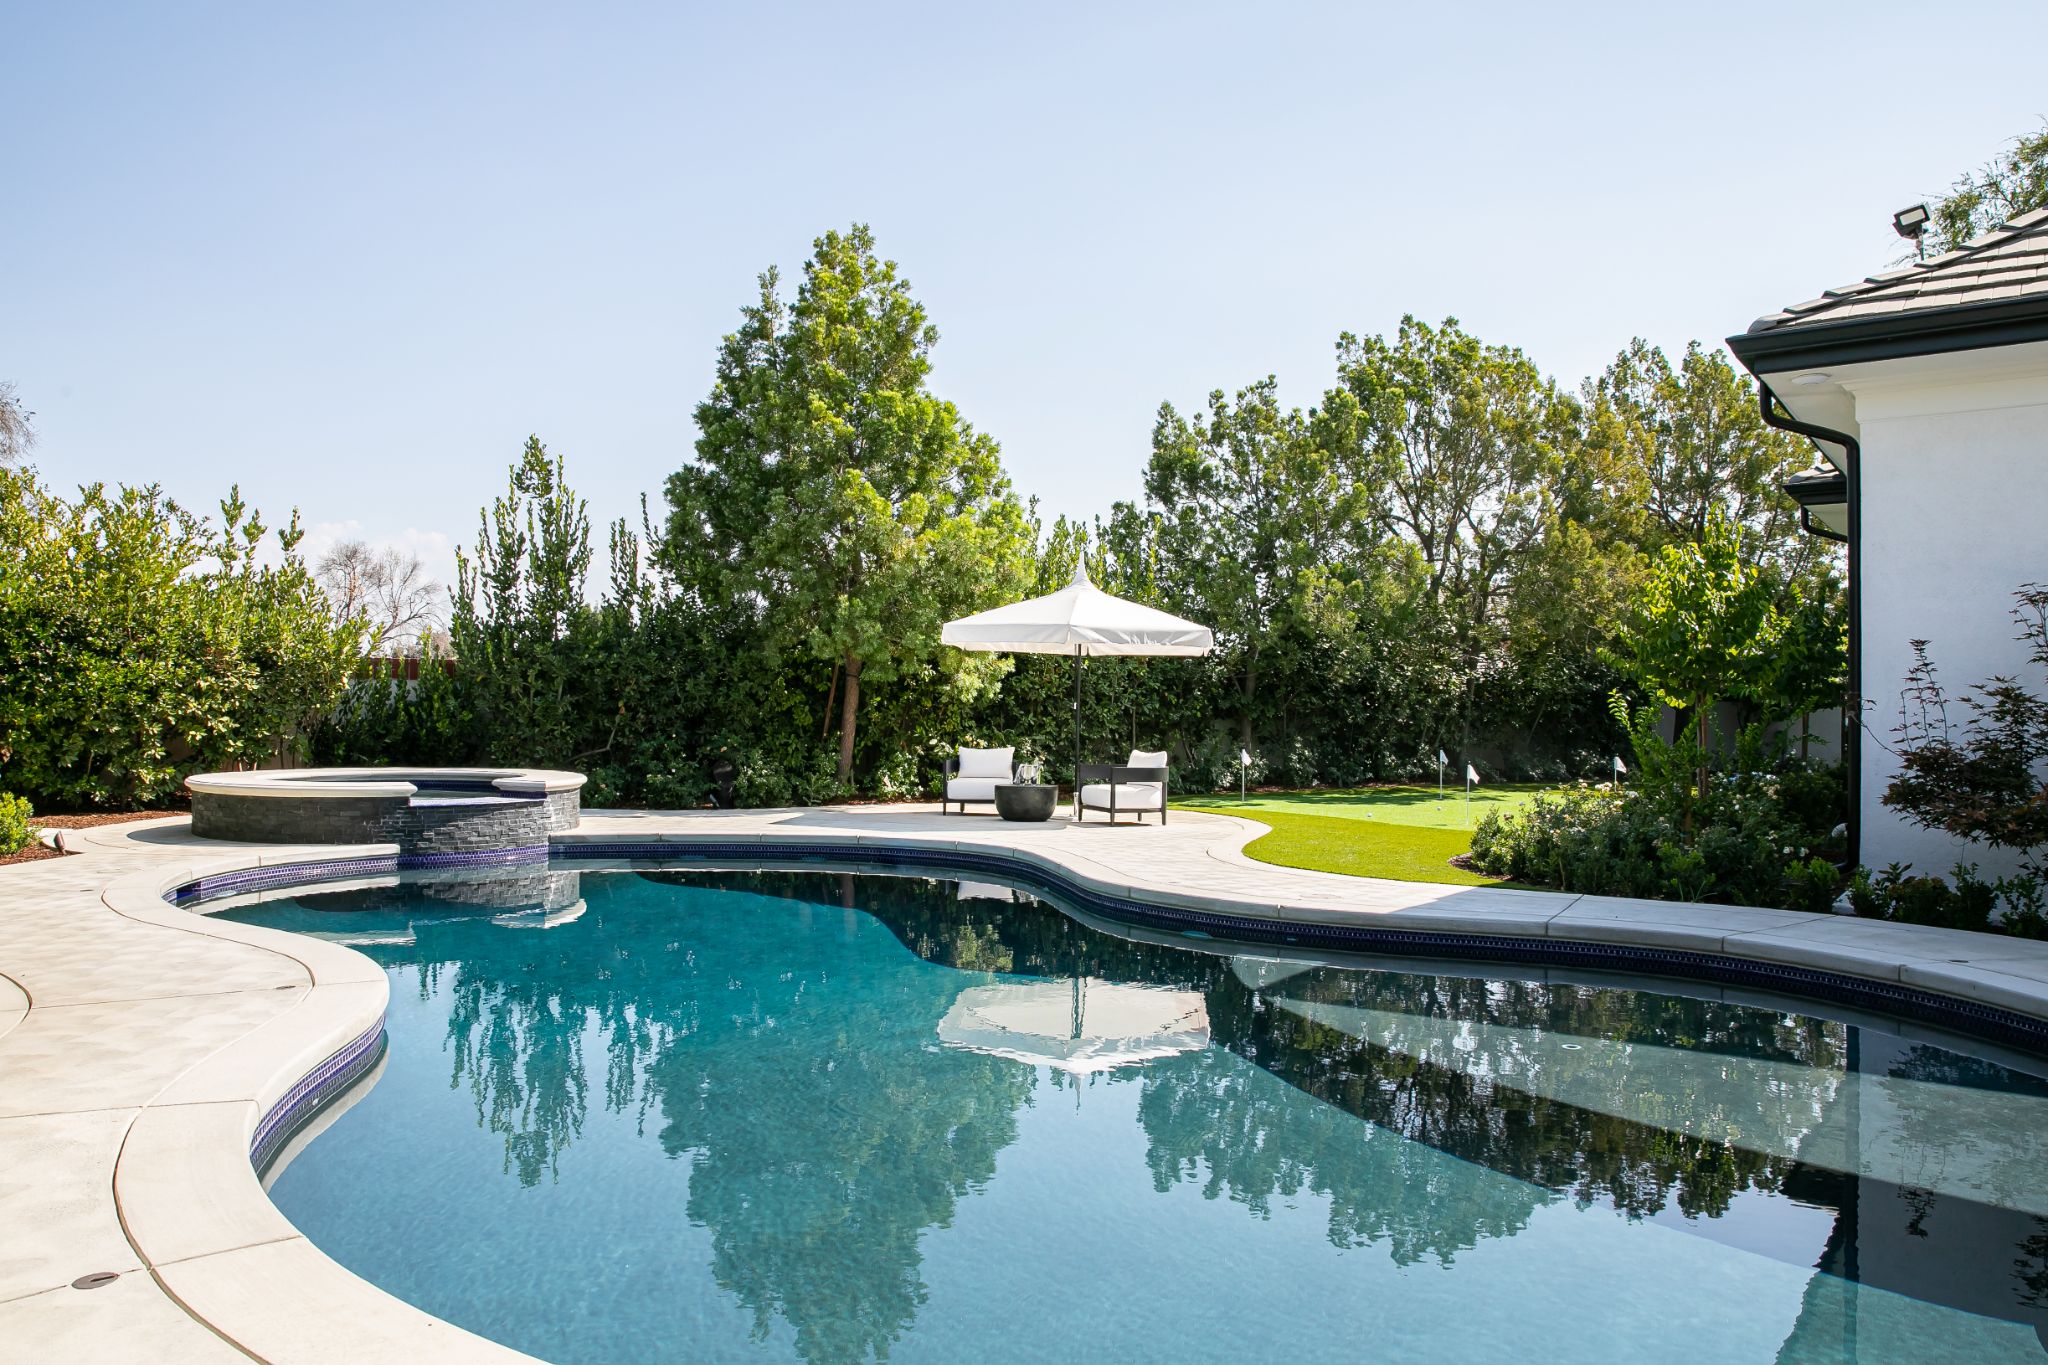 Pool landscaping ideas: The best materials to use in and around a backyard  pool